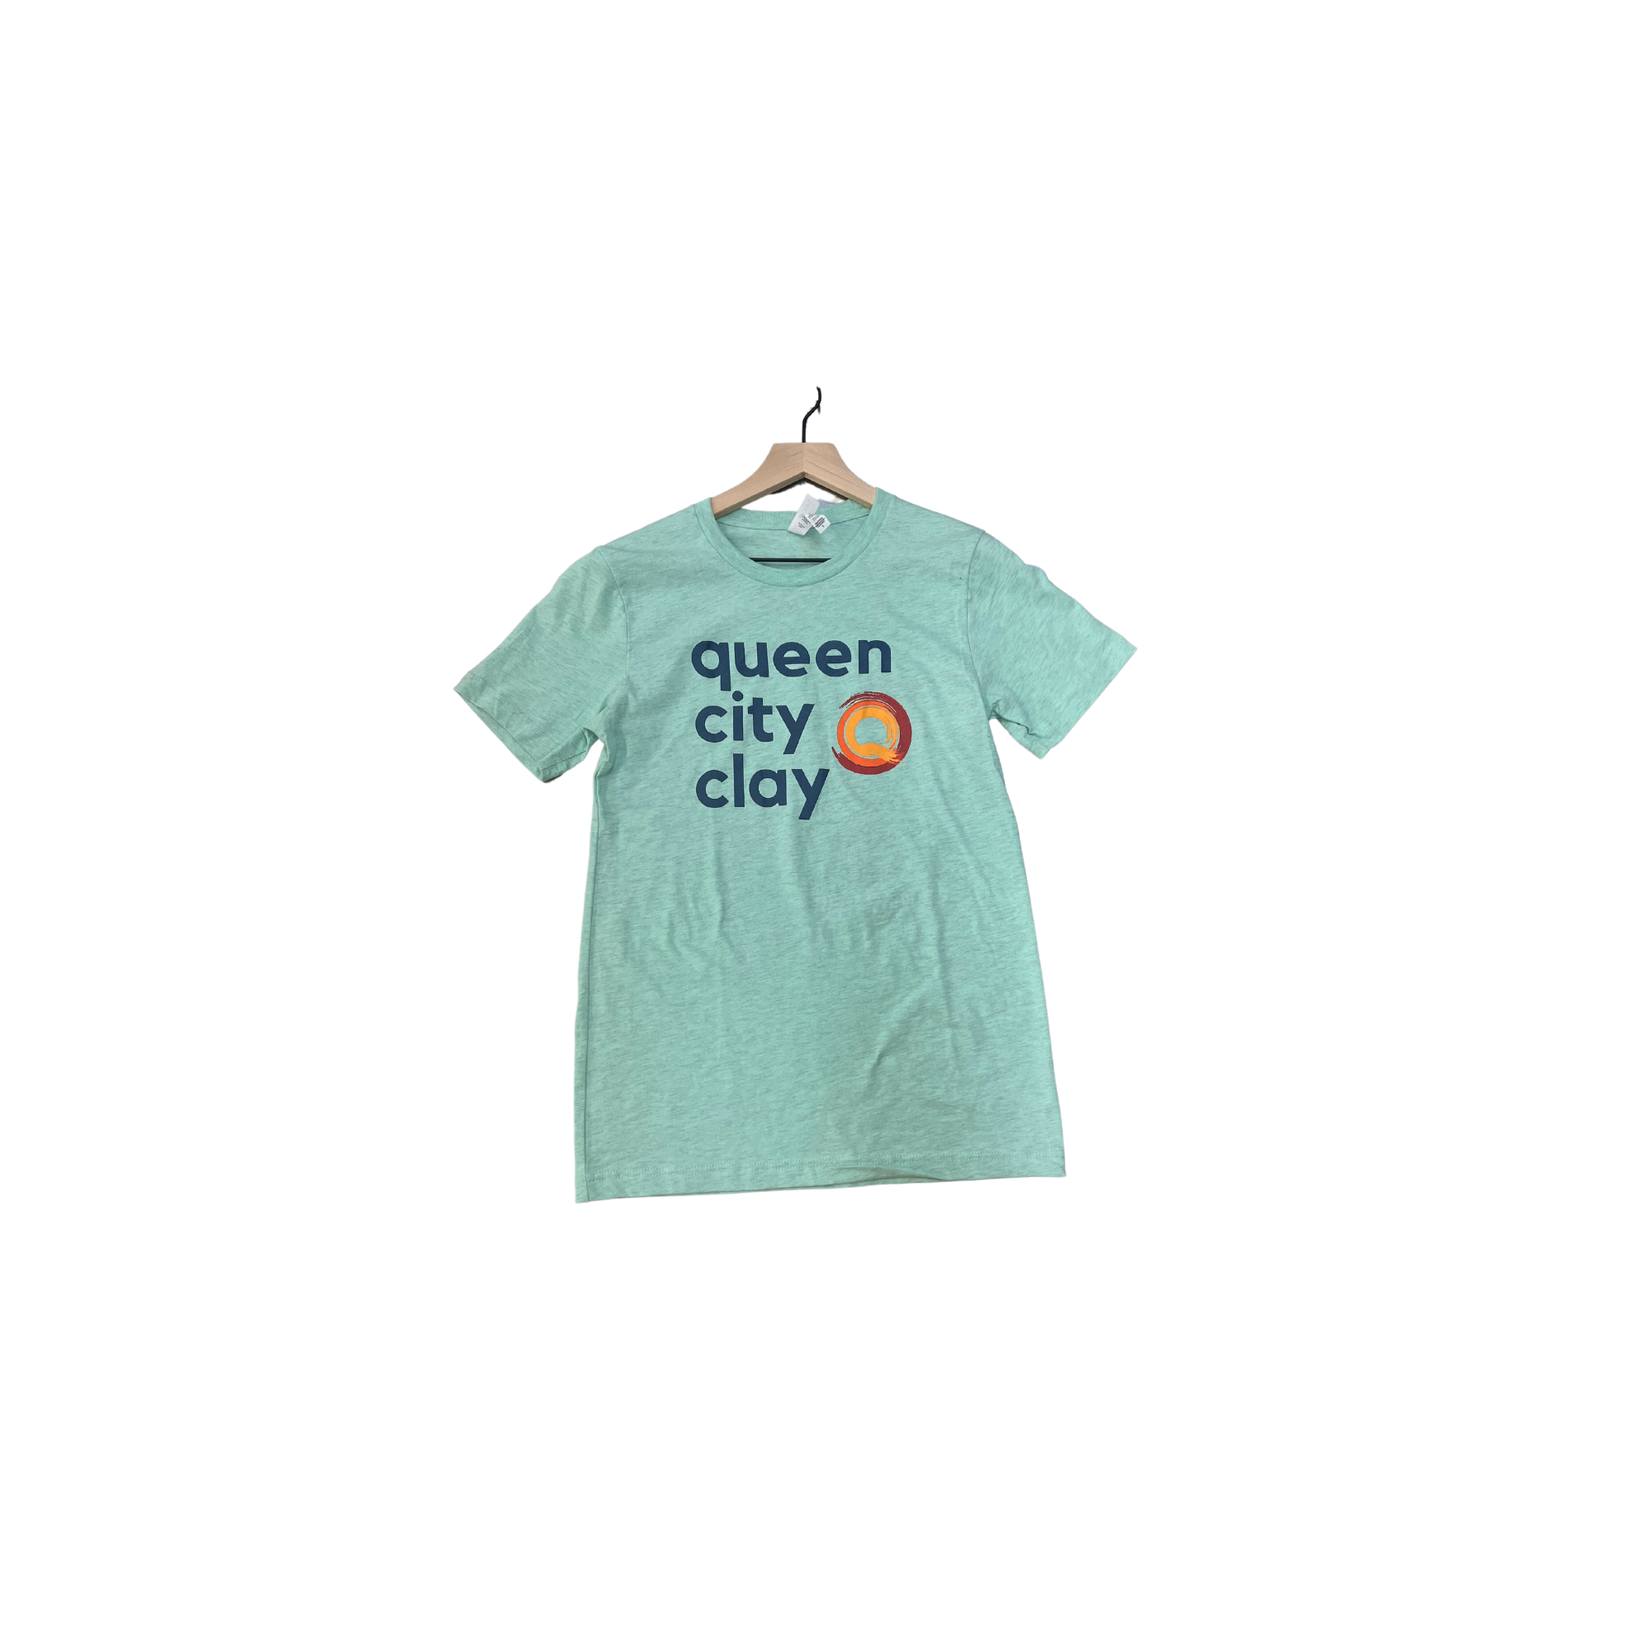 Queen City Clay QCC Mint Stacked Logo Tee Shirt